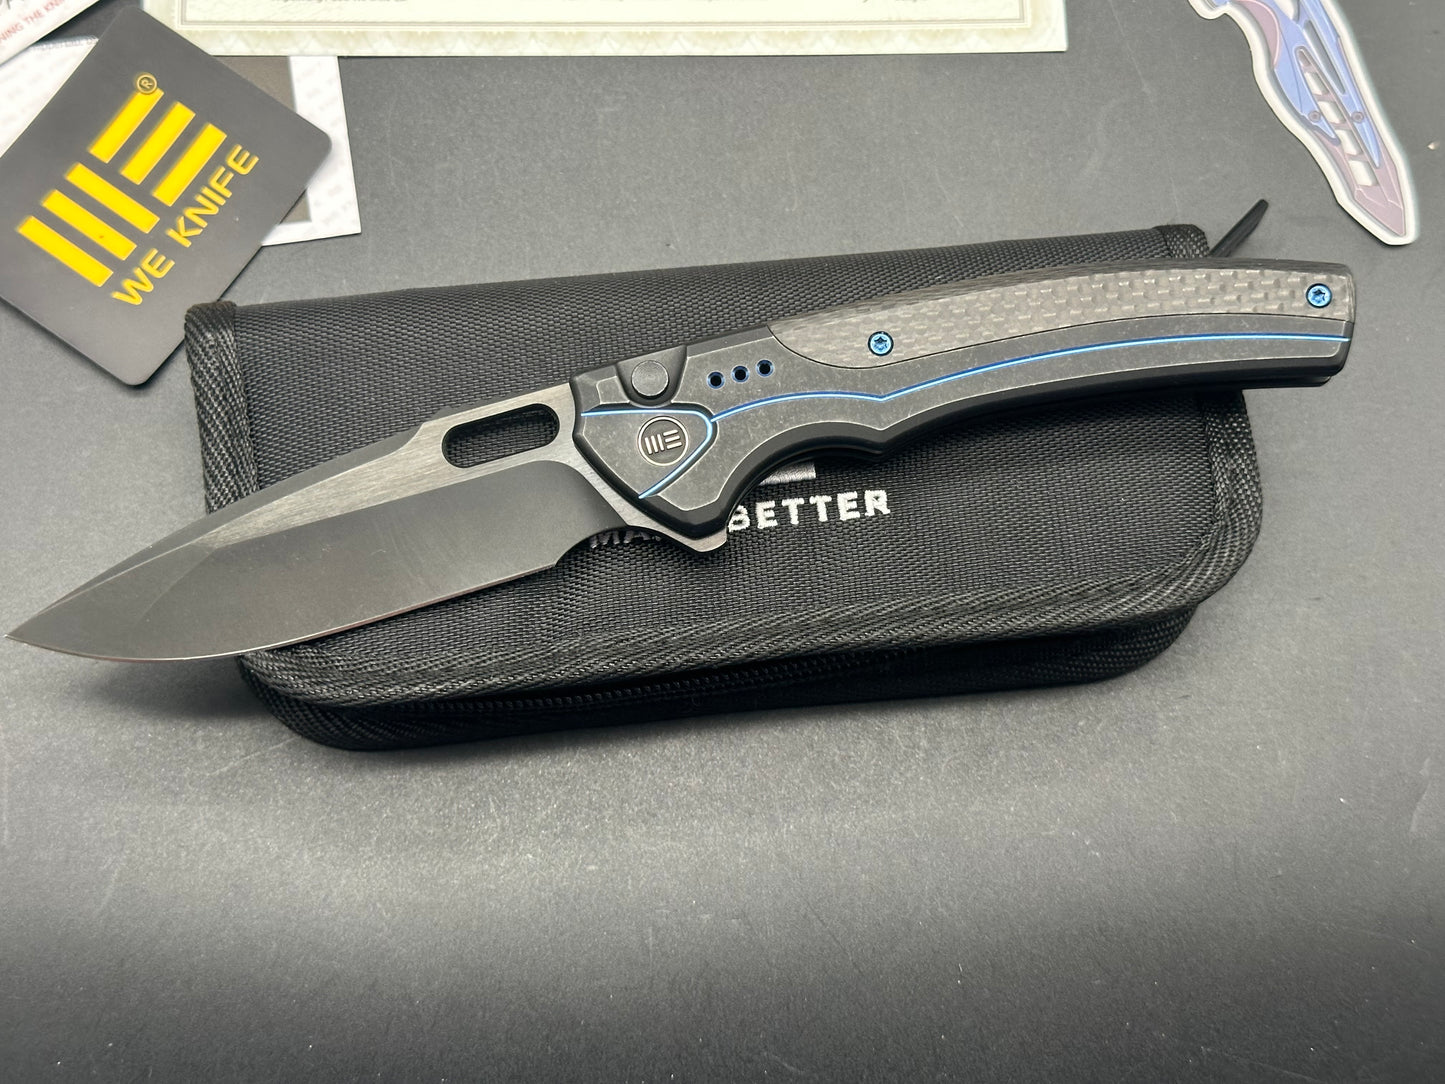 WE Knife Co. Exciton Limited Edition Knife Black Ti/CF (3.7" Black)